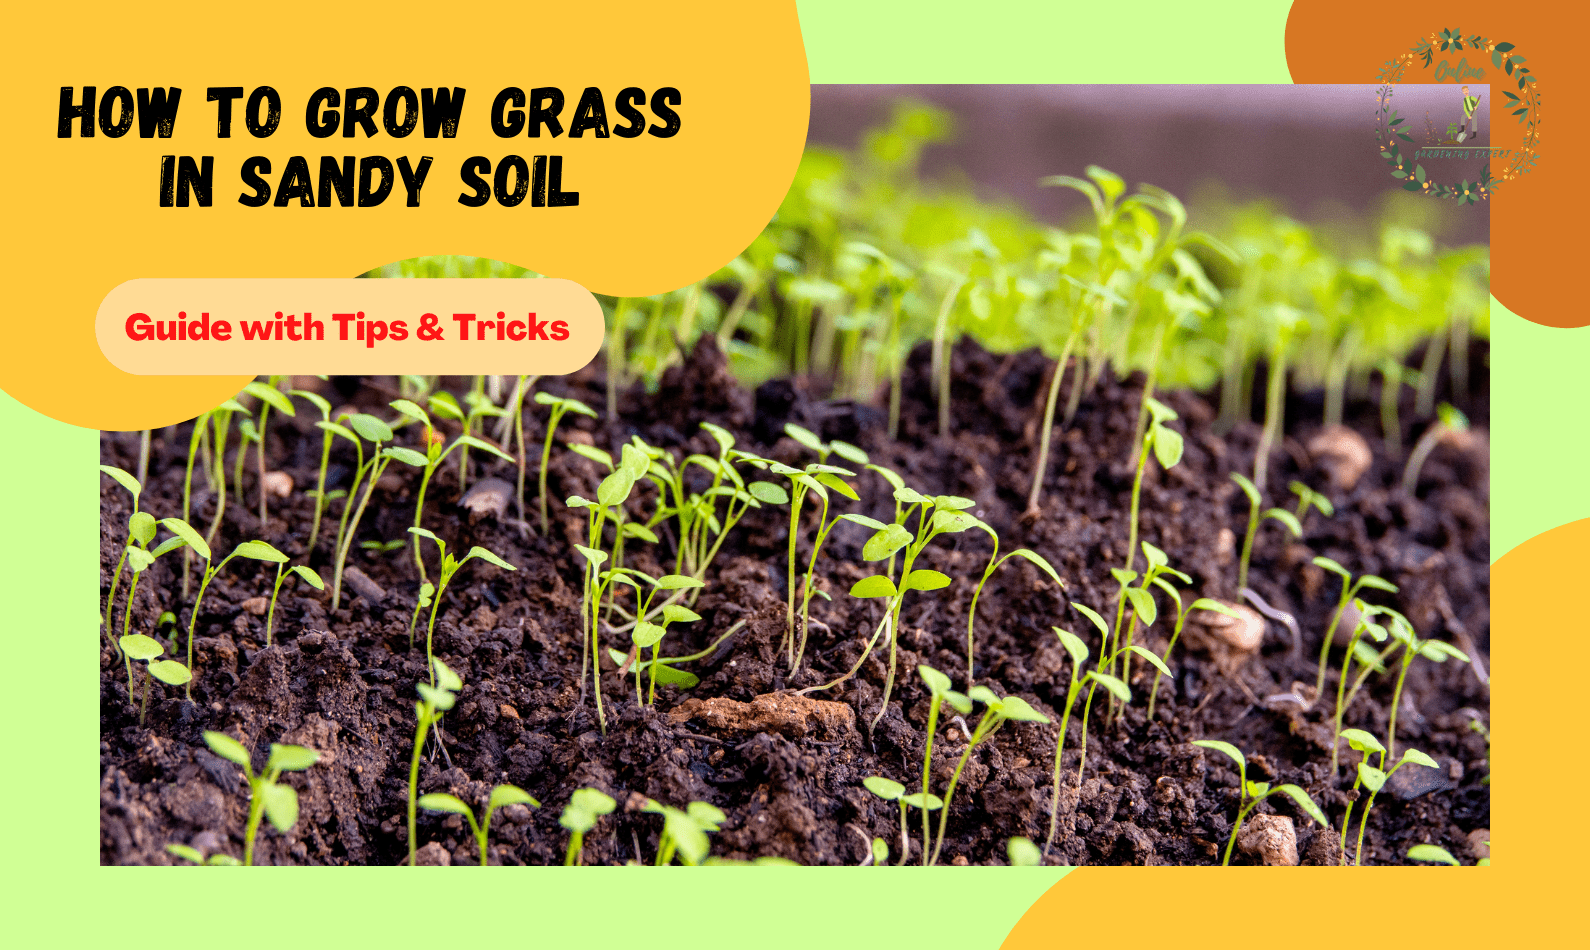 How to grow grass in sandy soil